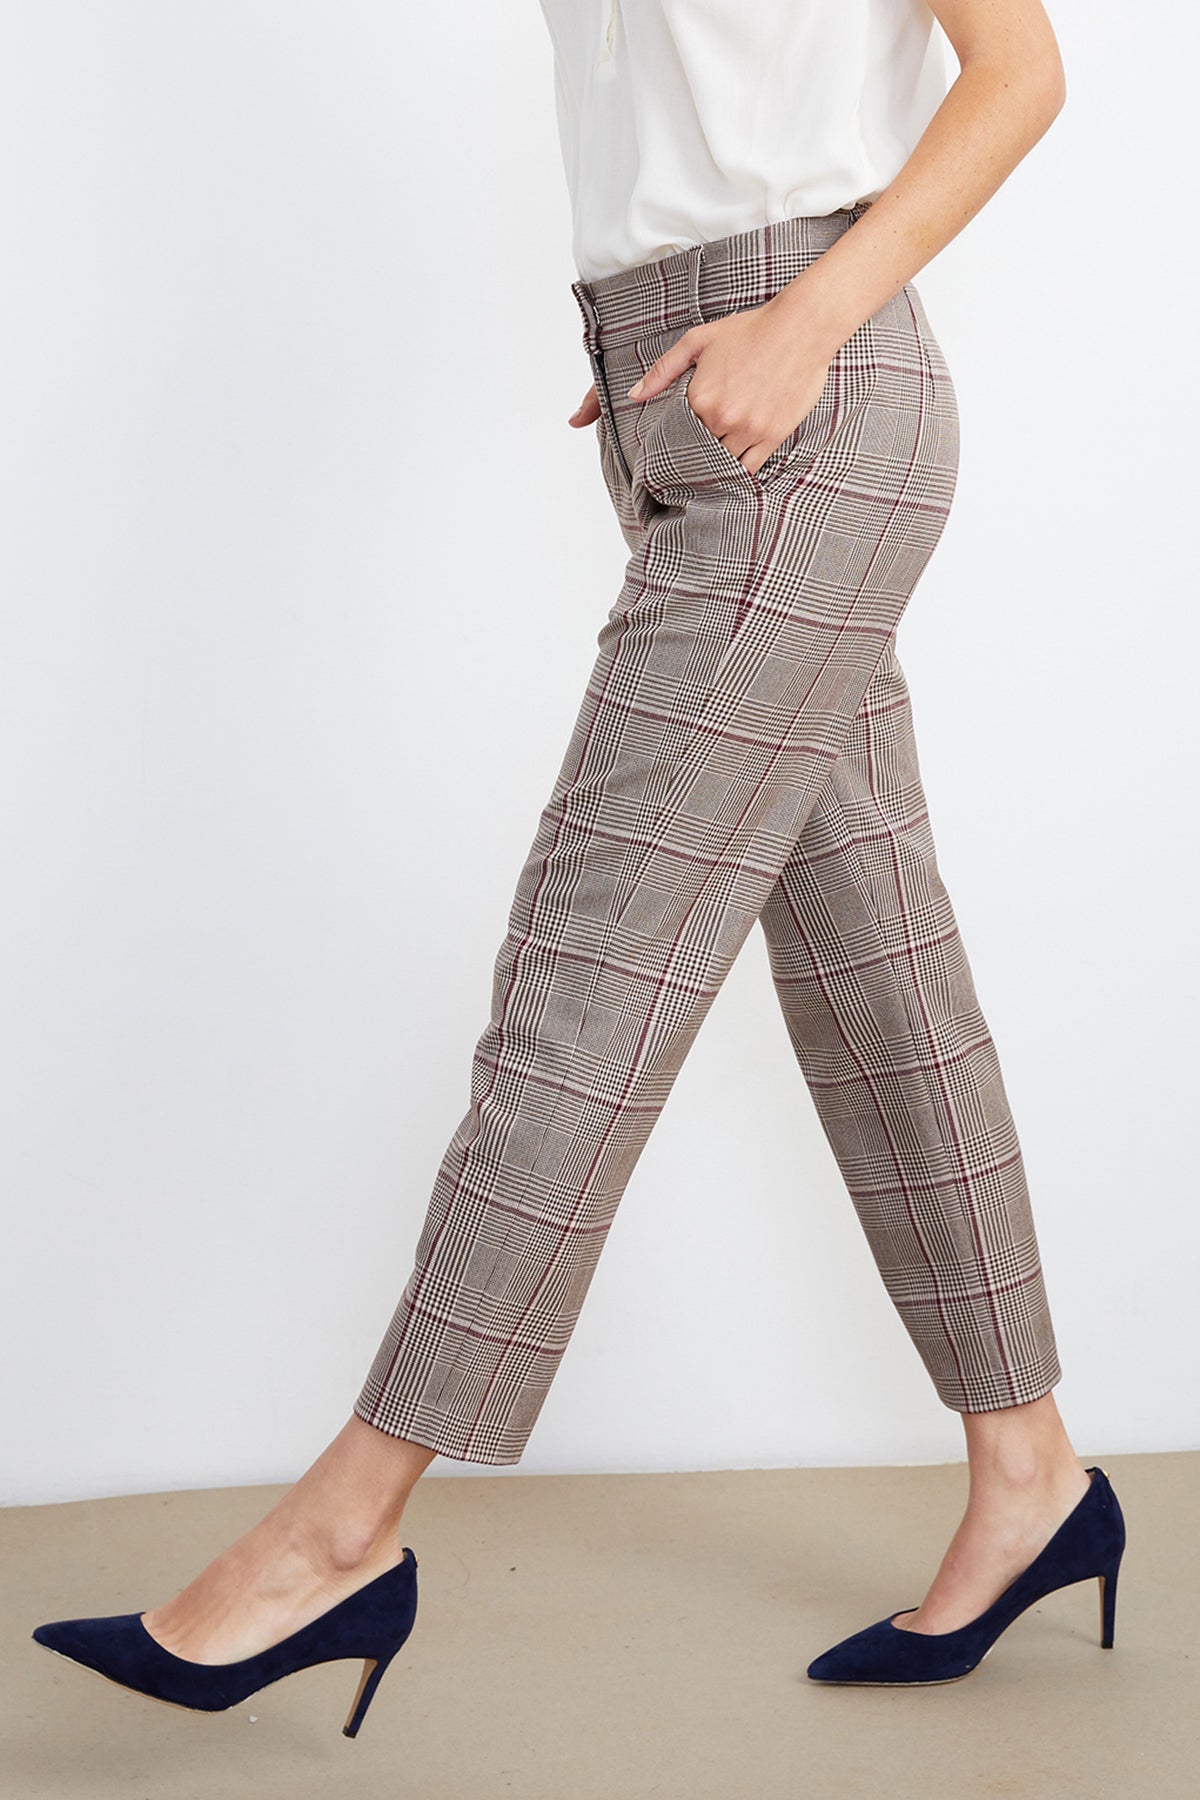 How To Style Plaid Pants For Fall (2023 Style Tips) - Purfect Sunday